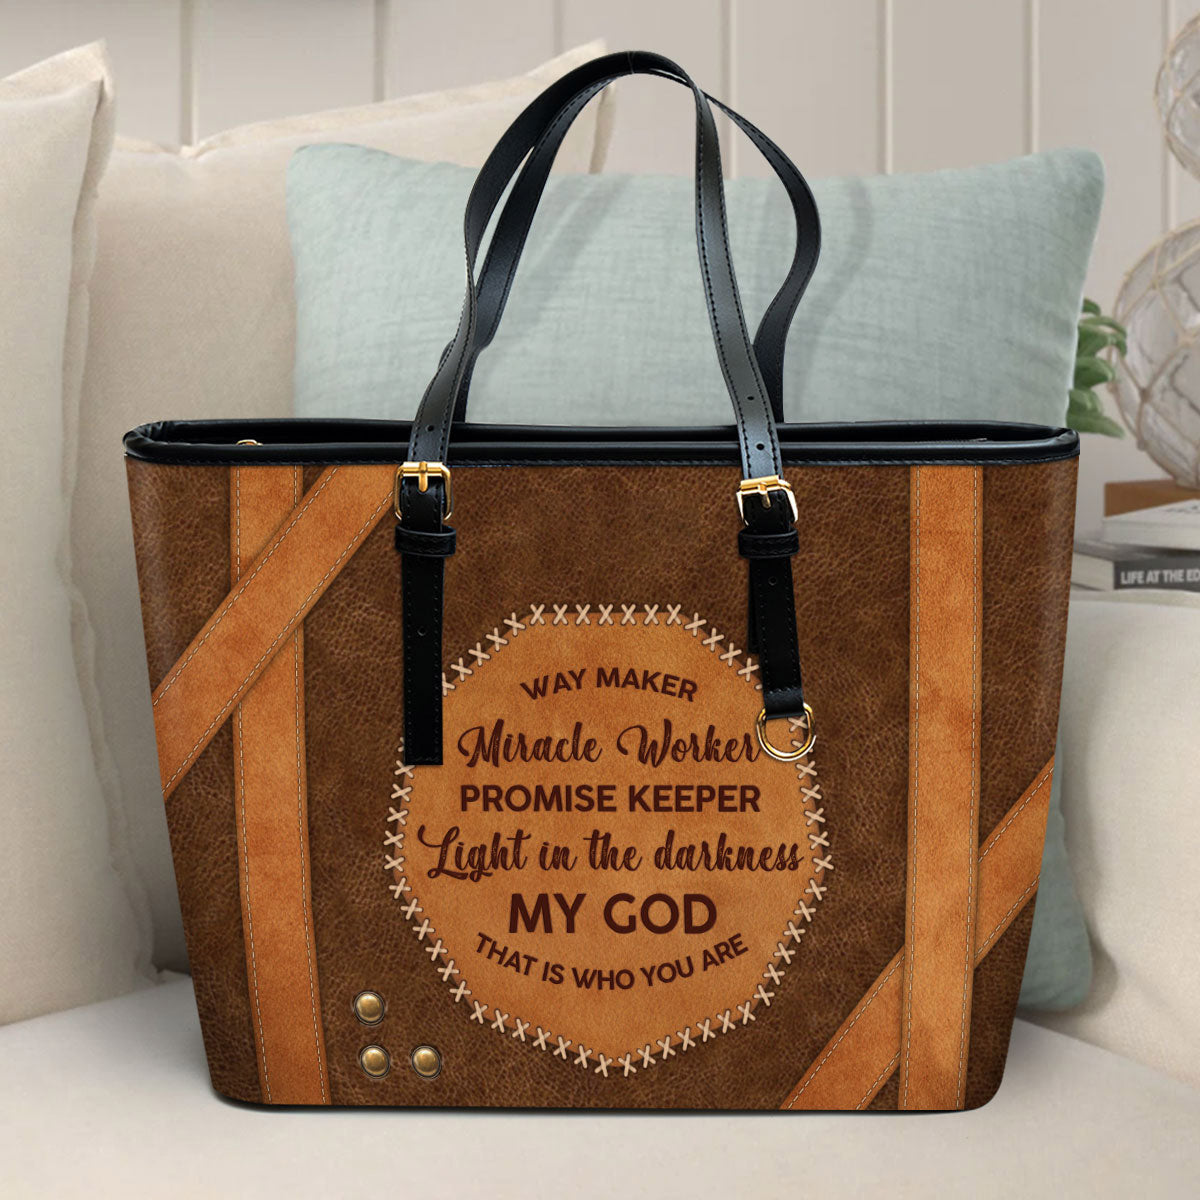 My God That Is Who You Are Large Leather Tote Bag - Christ Gifts For Religious Women - Best Mother's Day Gifts